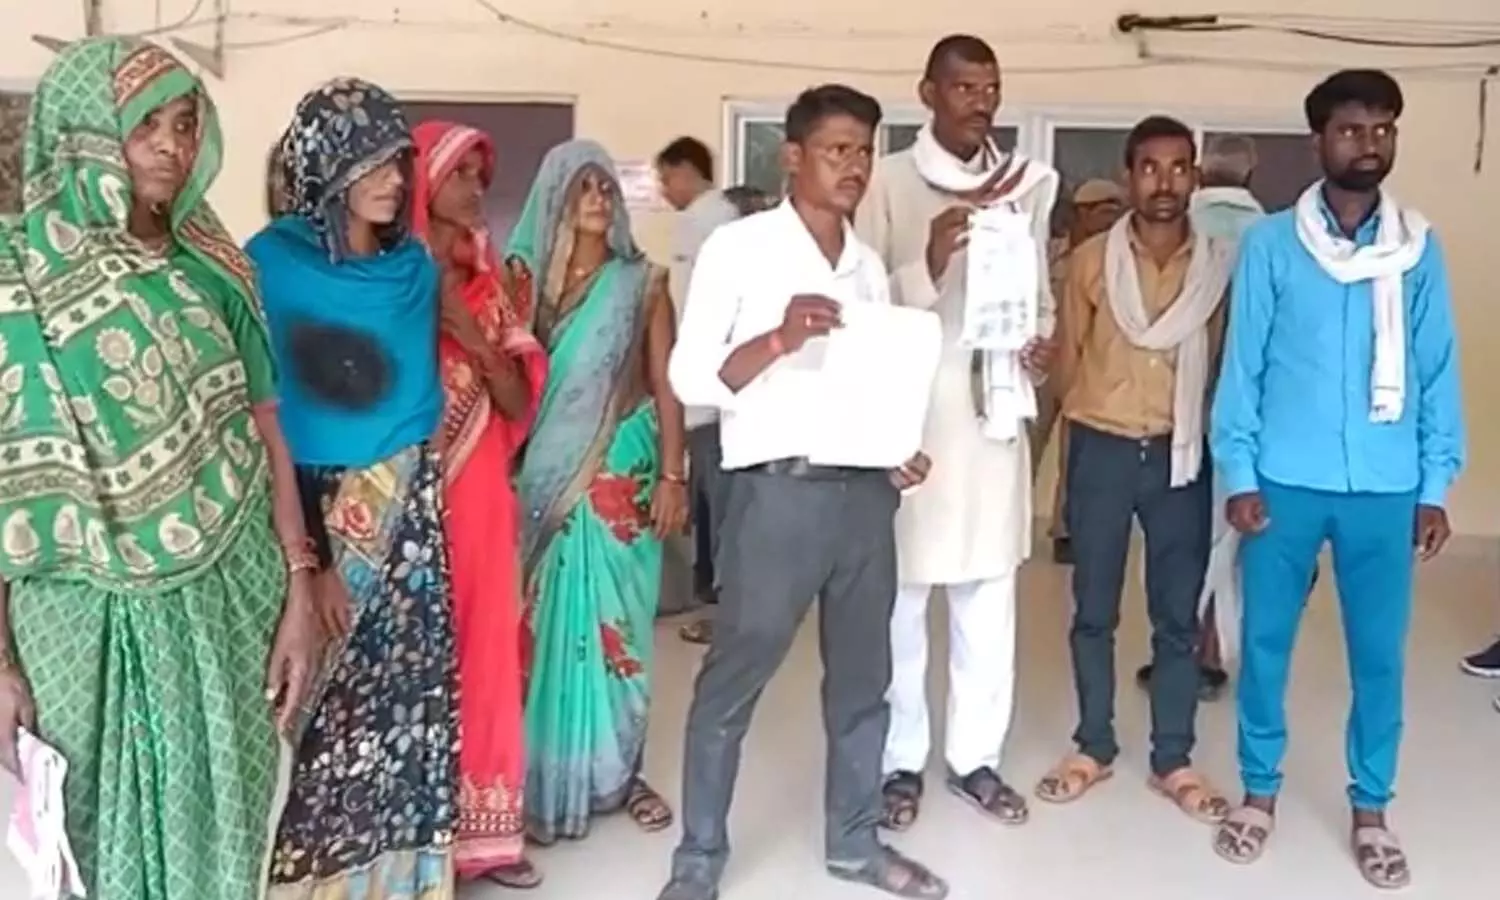 Banda: Municipal council employees cheated villagers of three lakh rupees